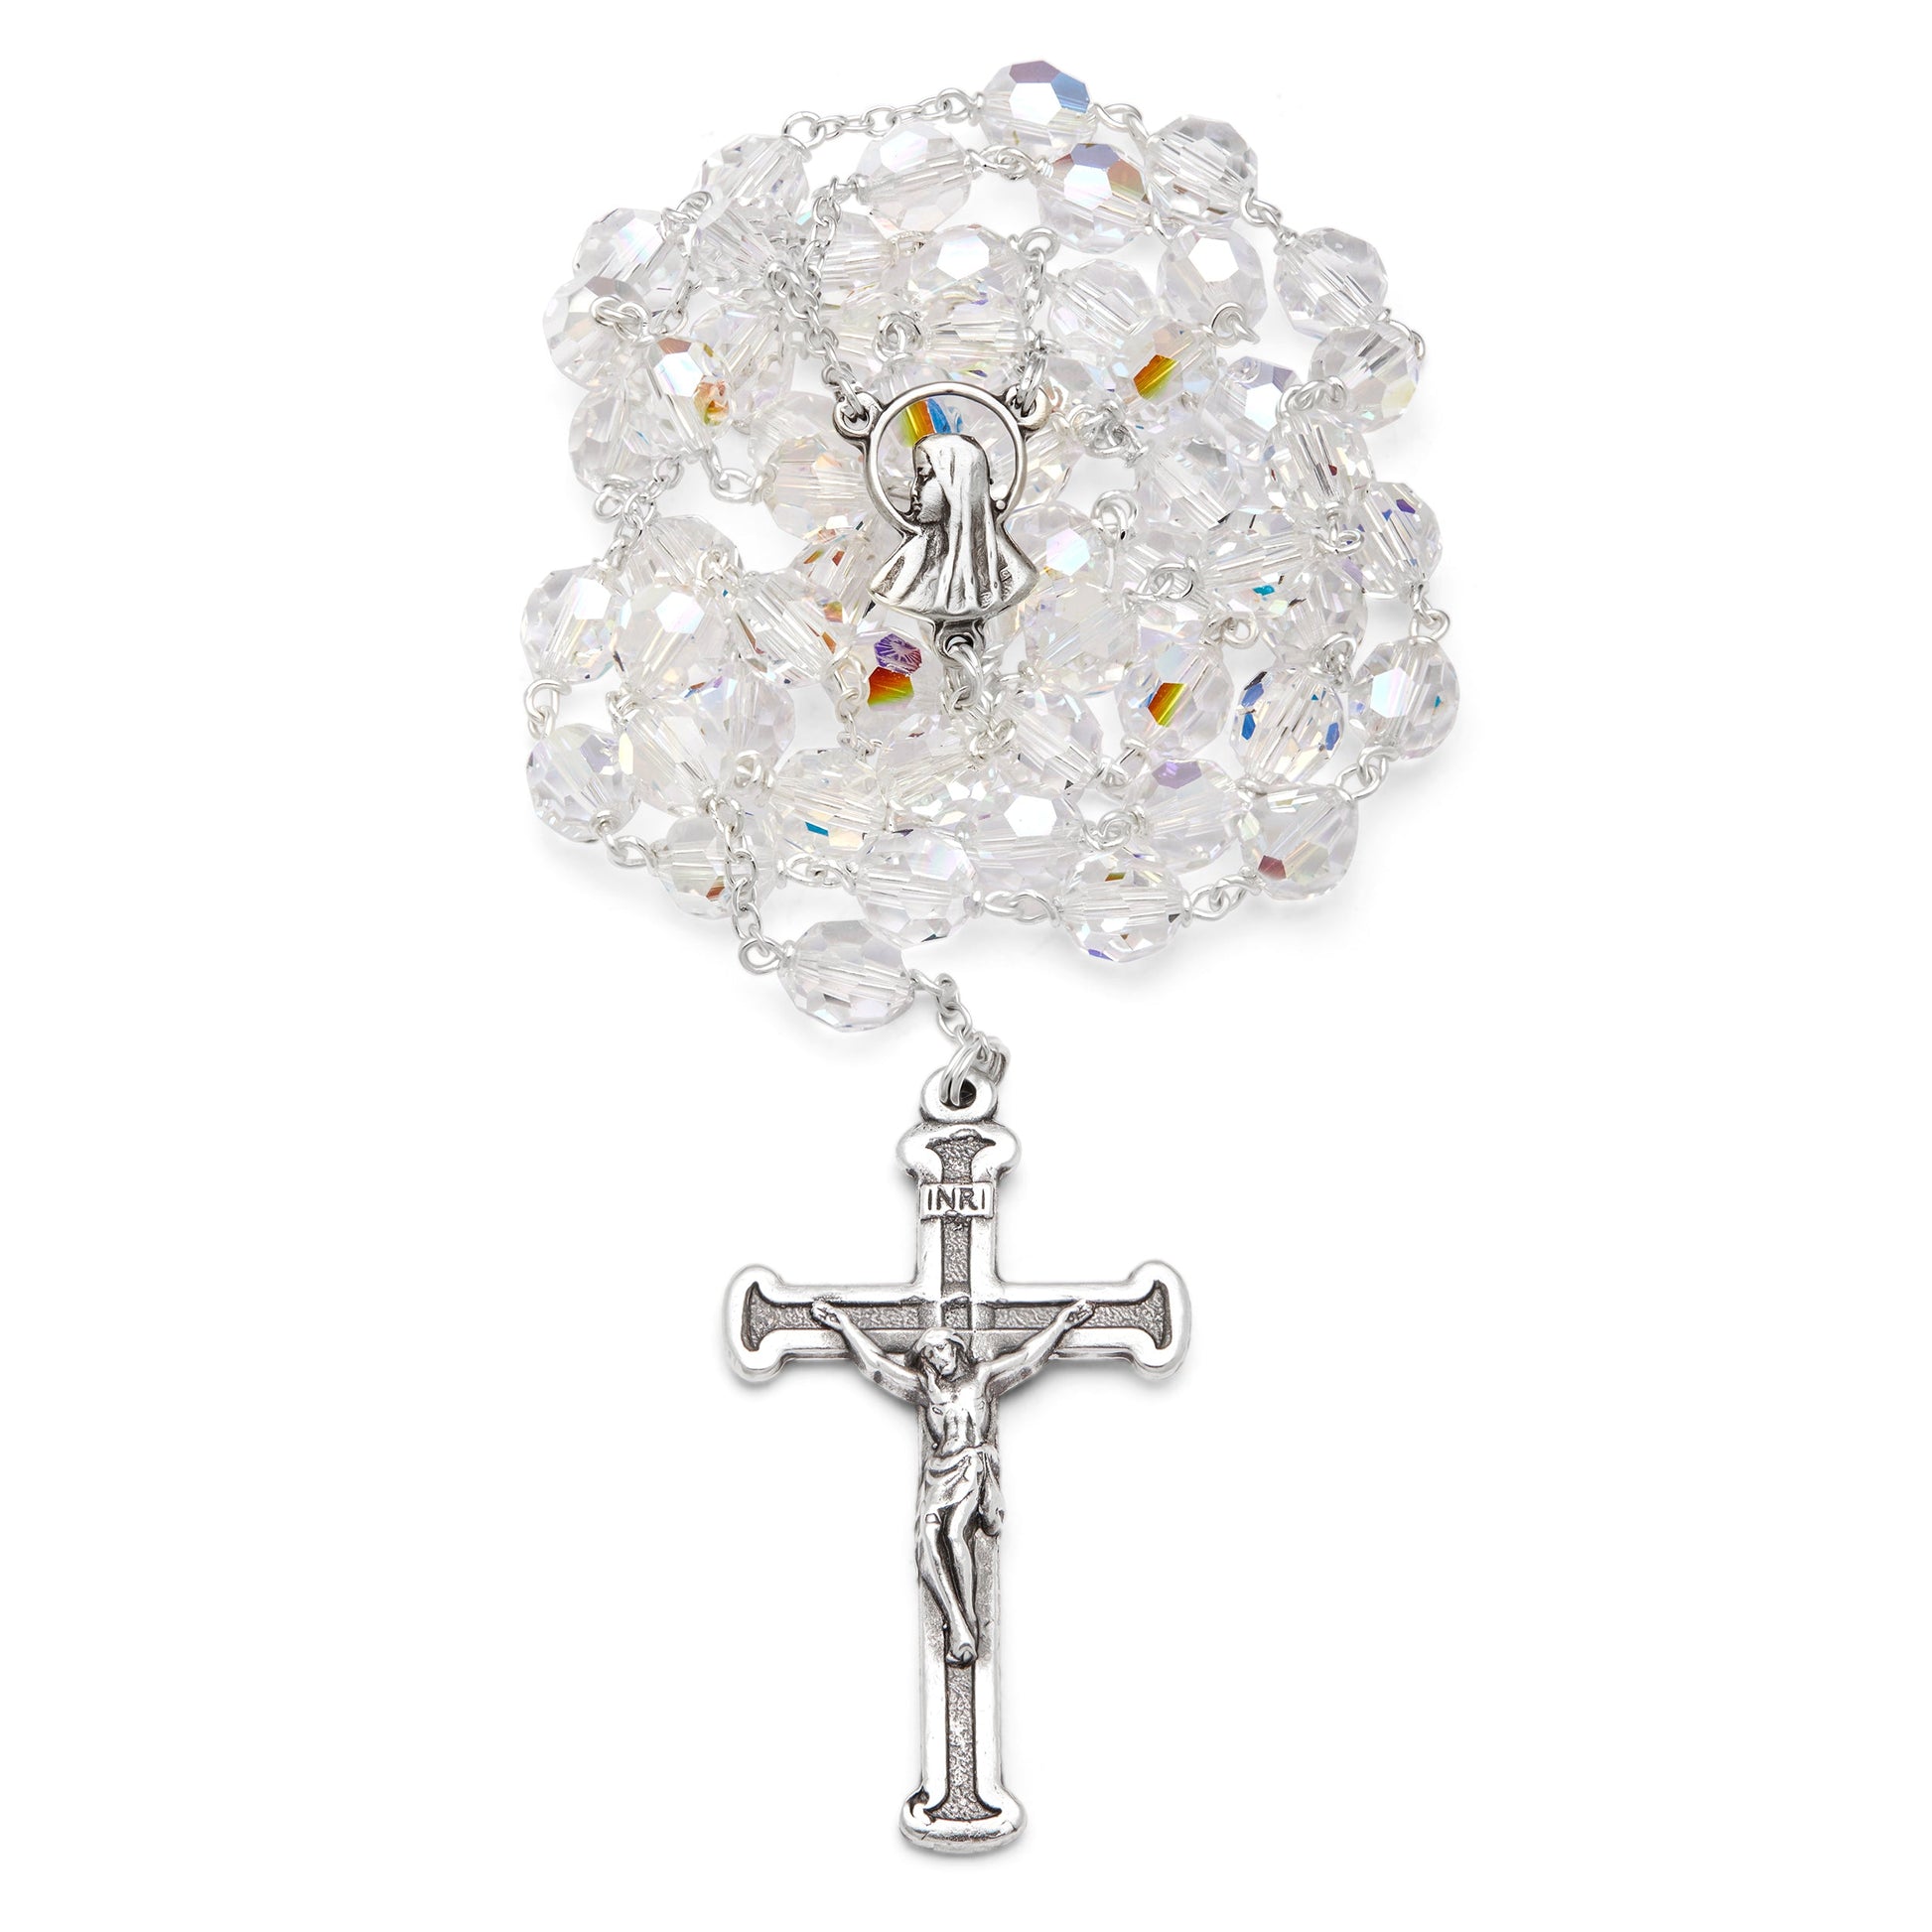 Rosary Beads, Ornate Crucifix, Blessed Mother Centerpiece, 5MM Swarovski  Crystal Beads